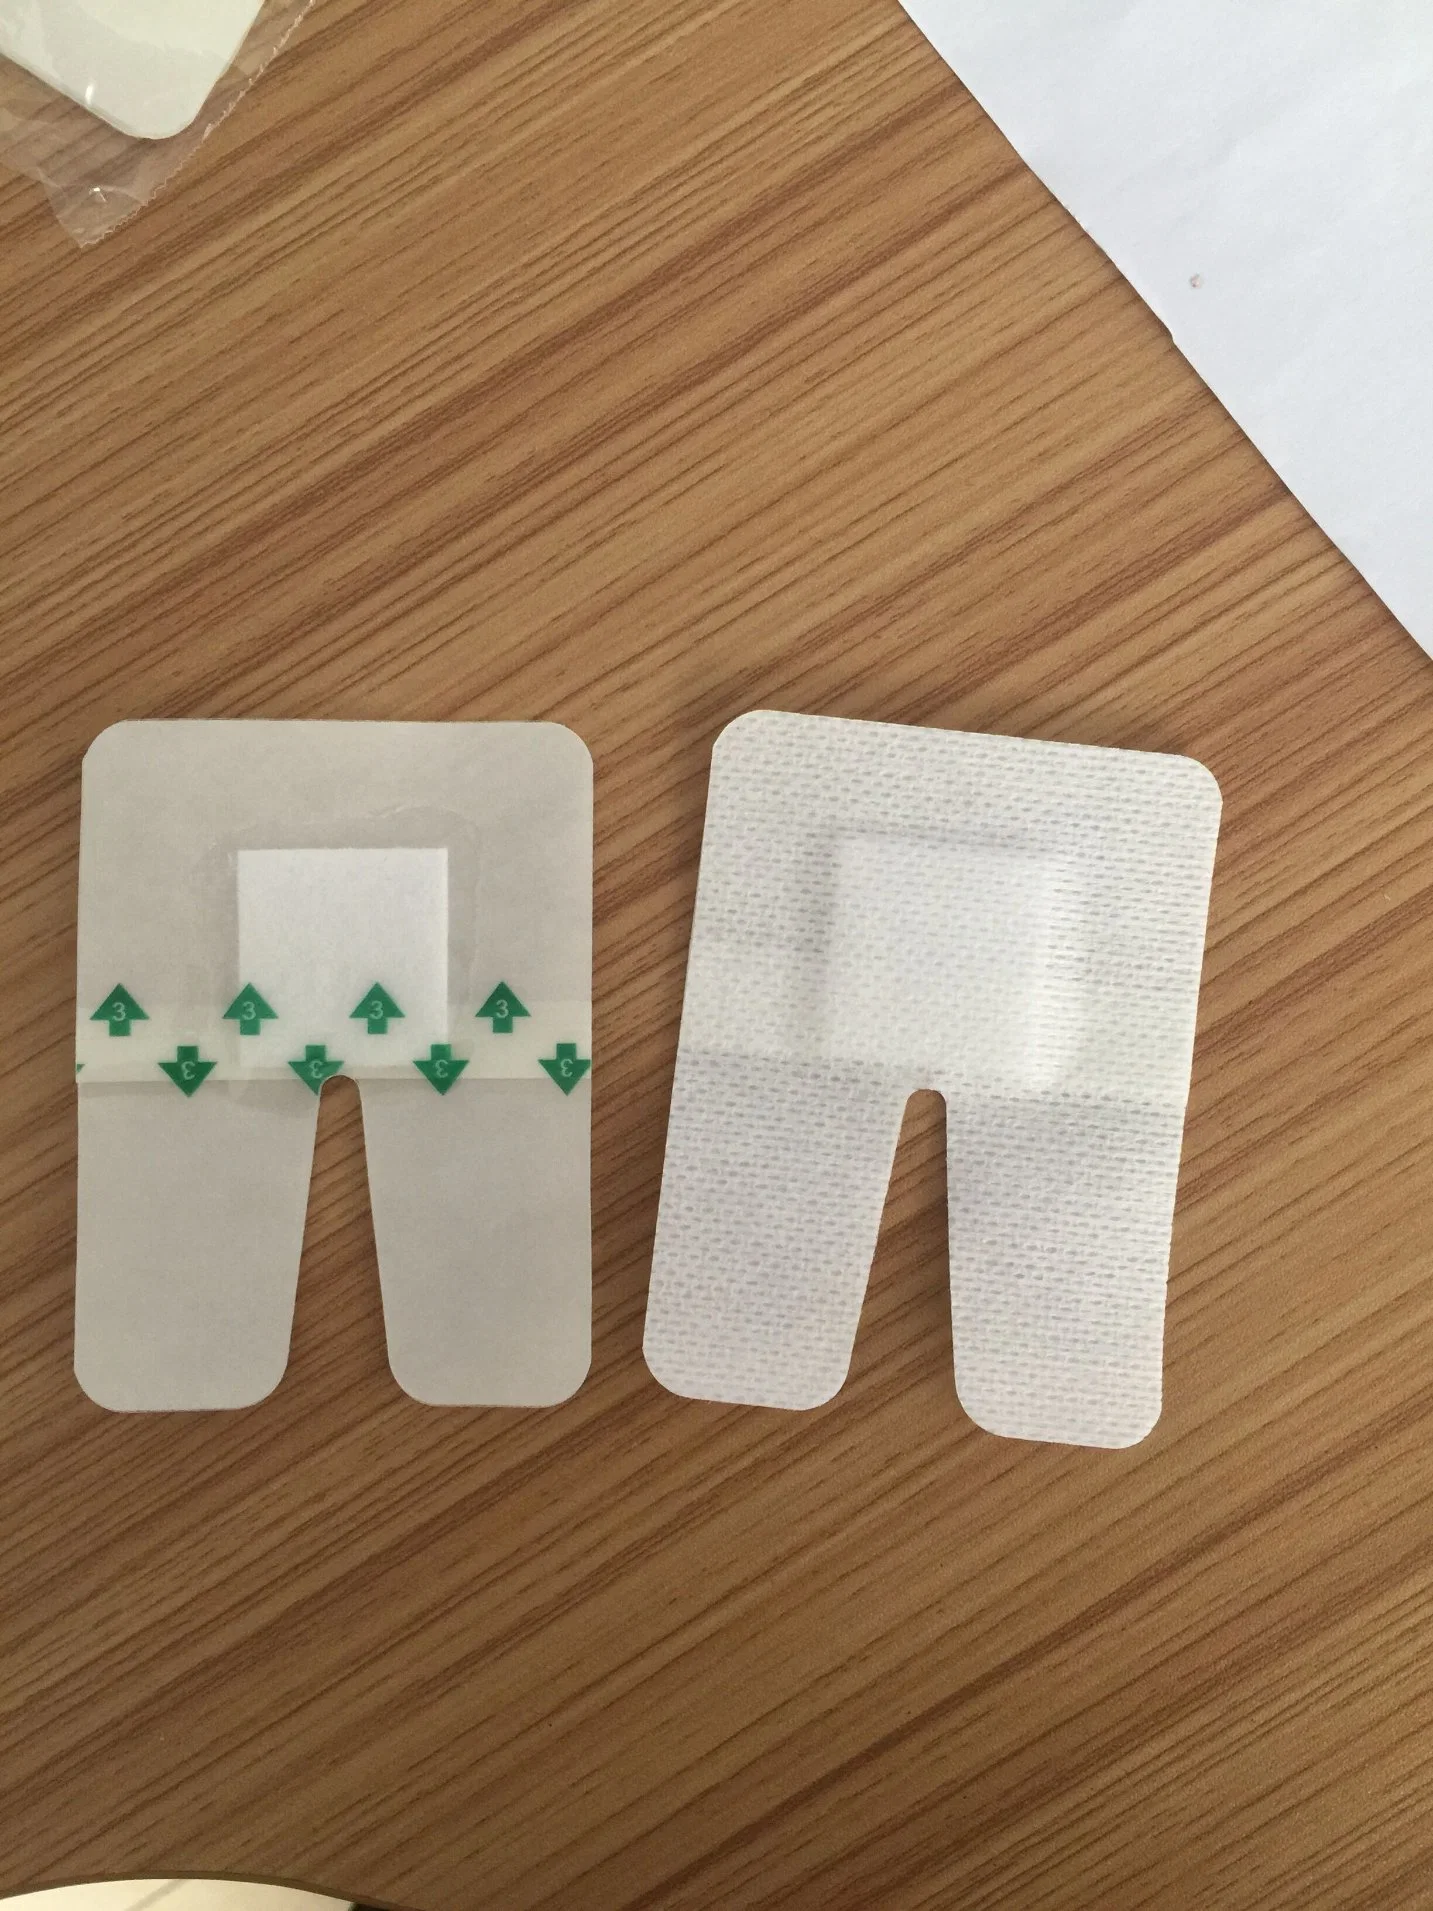 Bandage Intravenous Catheter Fixation, Non-Woven or PU Material, with a Moisture Absorbent Pad with Cuts Intravenous Catheter Wing IV Dressing Wound Dressing